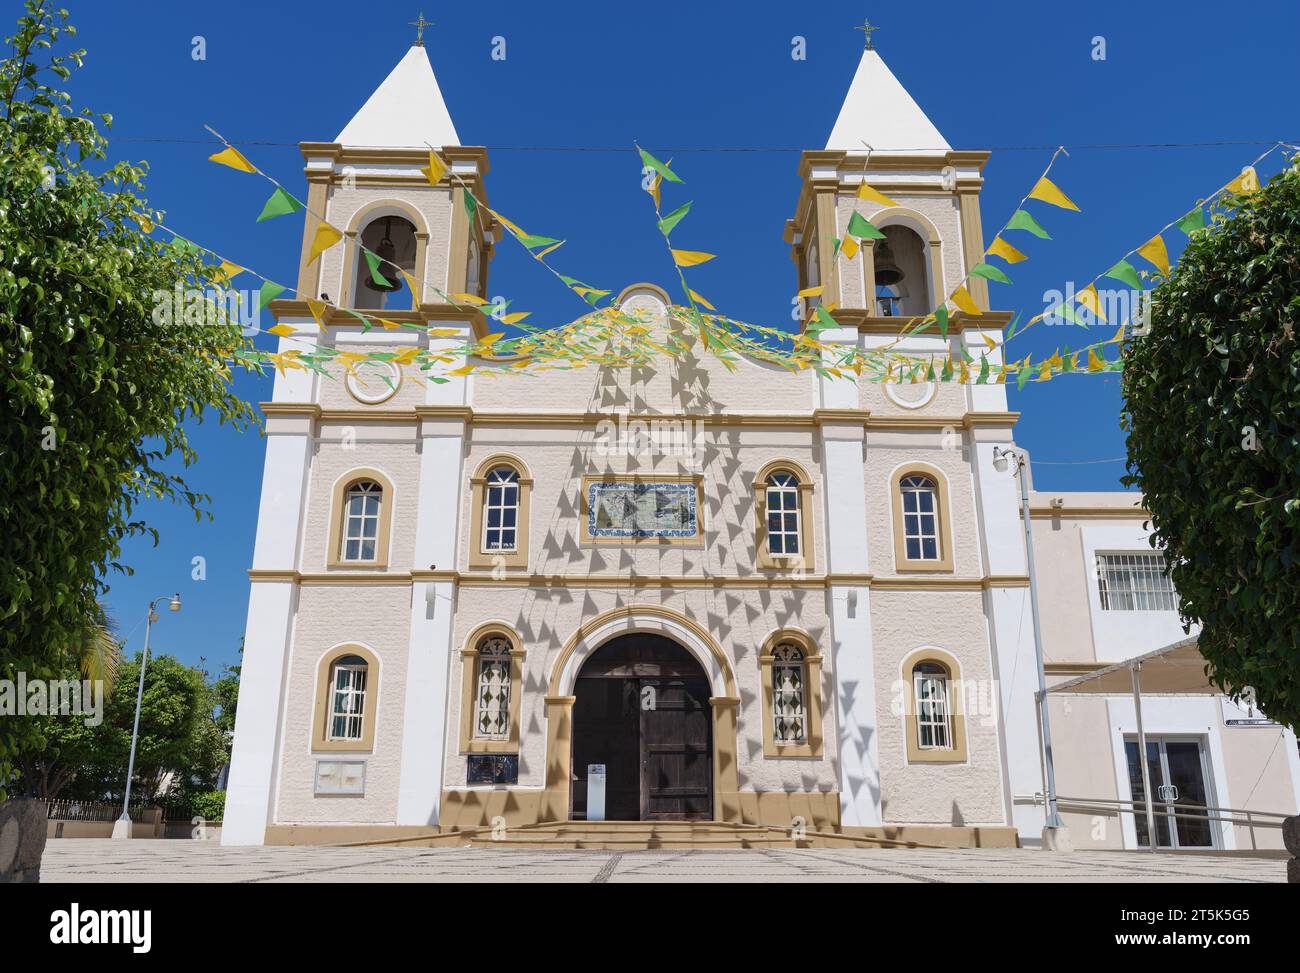 The Mision de San Jose Church in San Jose del Cabo, Mexico. The building is decorated with strings of green and yellow triangular flags. Stock Photo